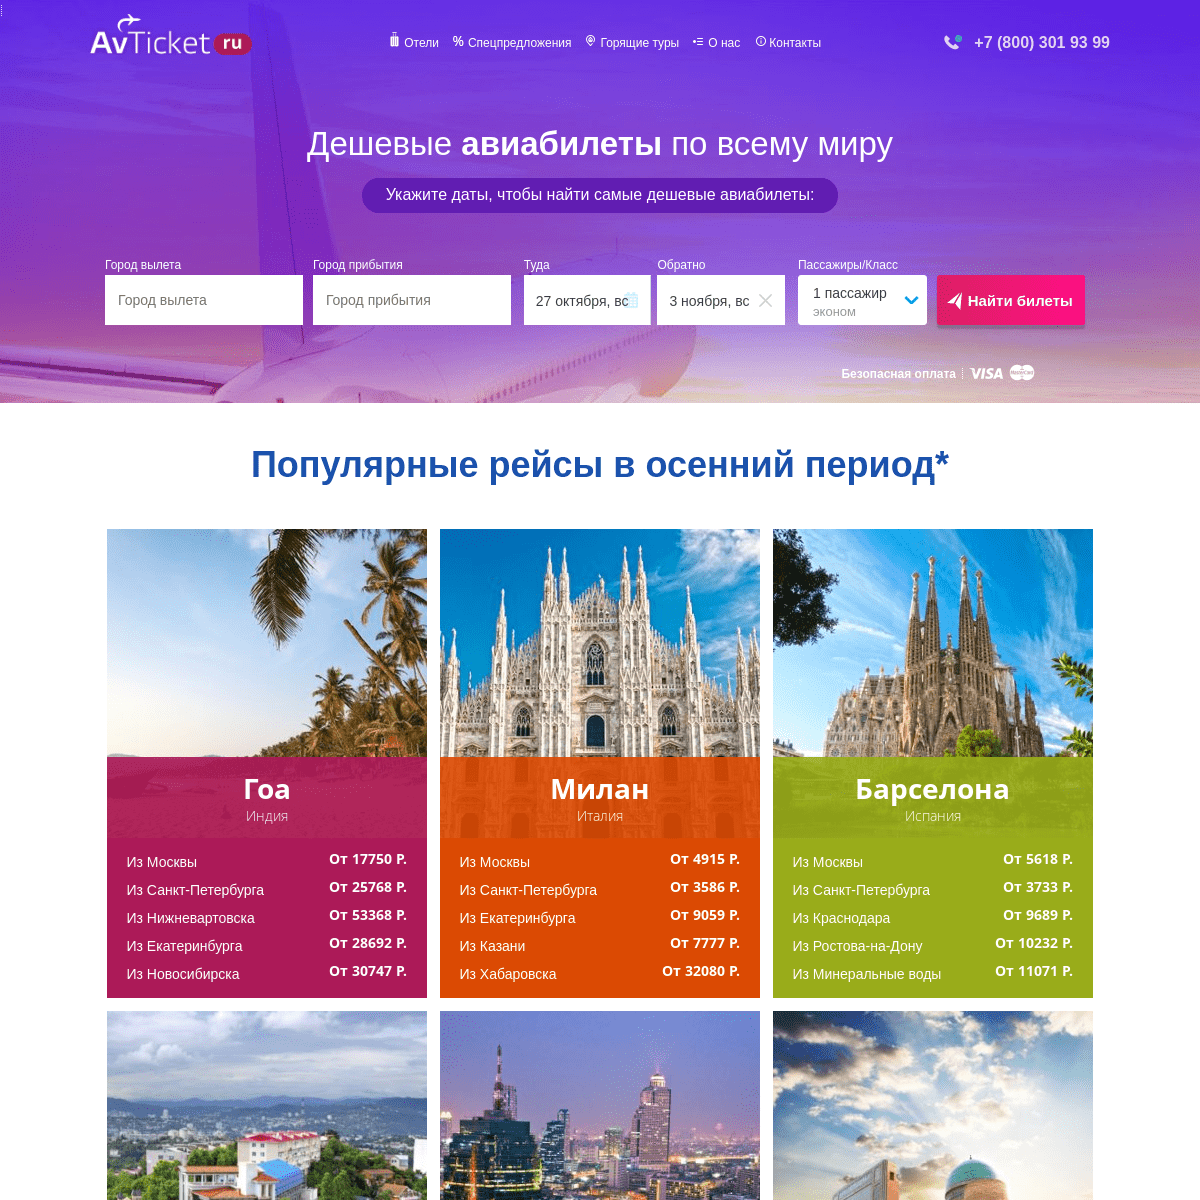 A complete backup of avticket.ru